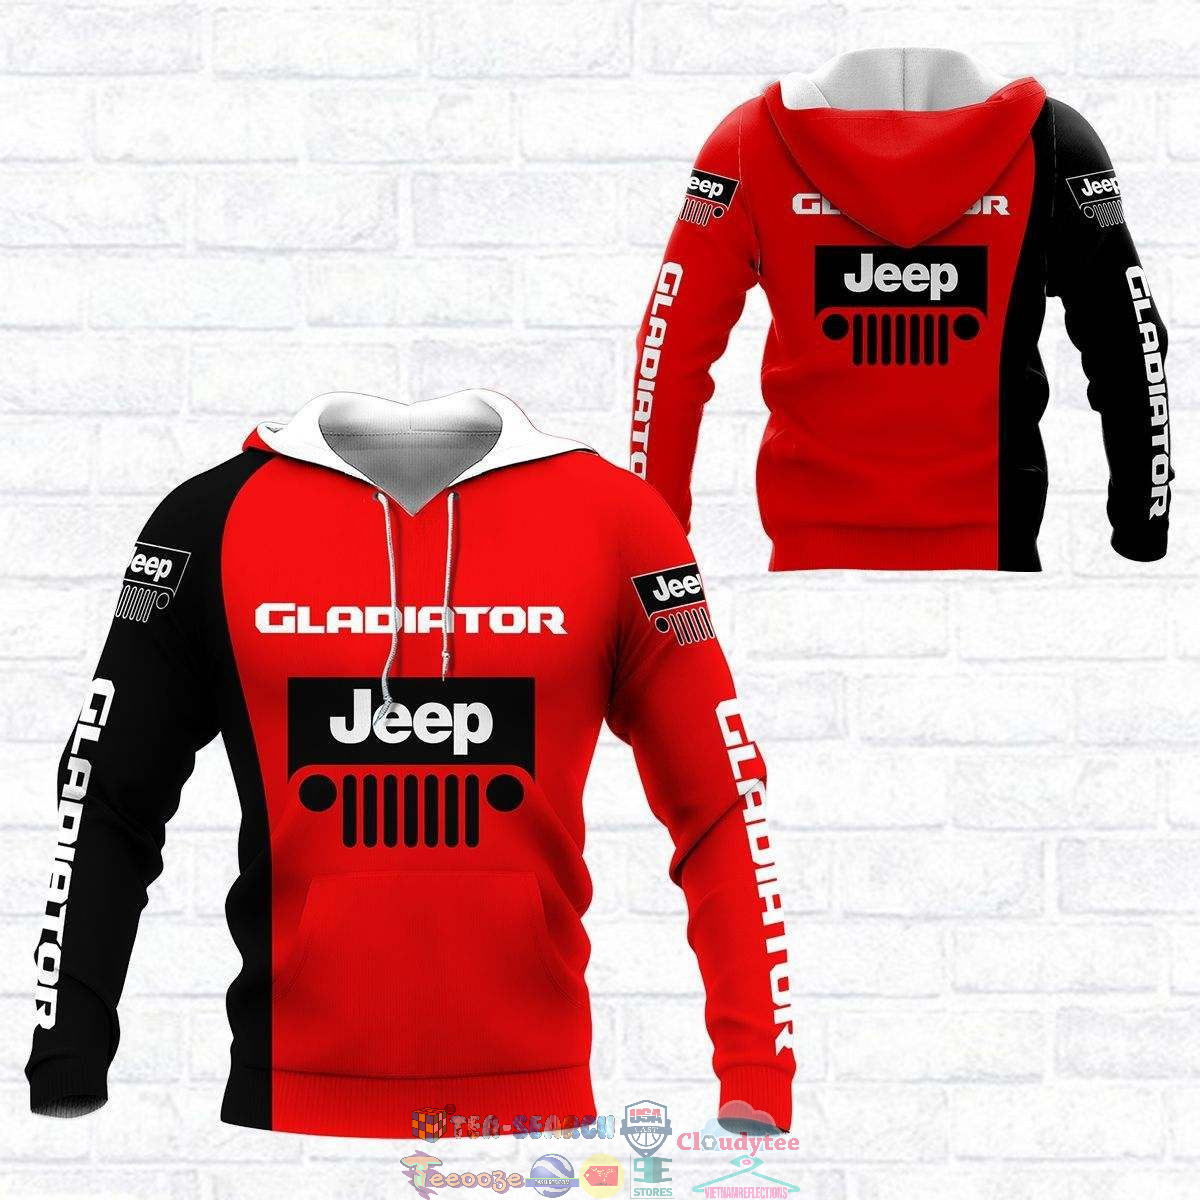 Jeep Gladiator ver 5 3D hoodie and t-shirt – Saleoff